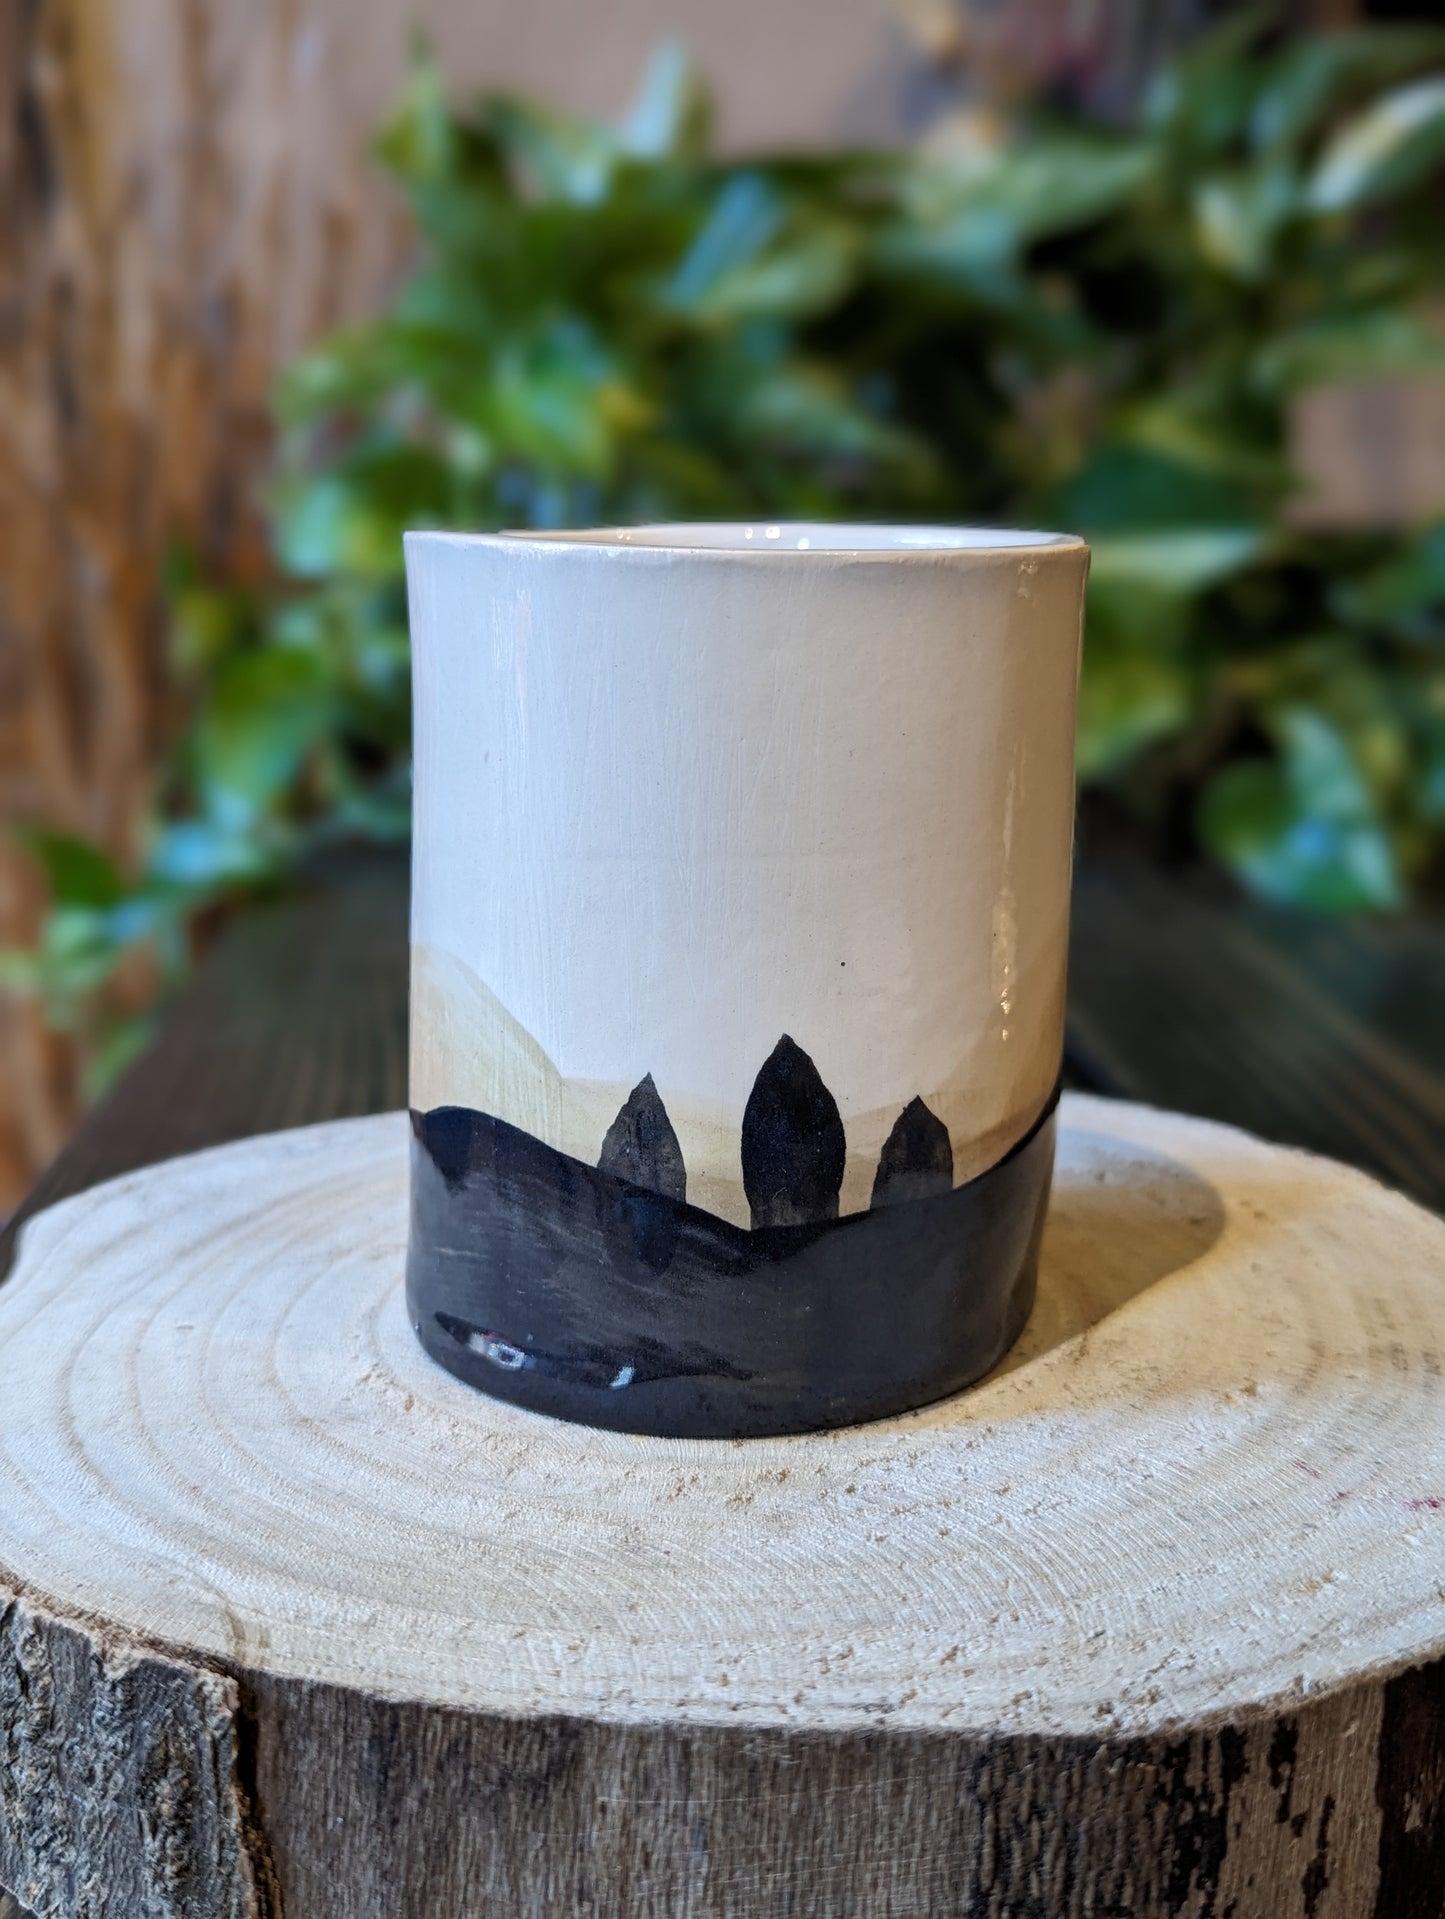 Standing Stones Vase by Ciara Veronica Dunne